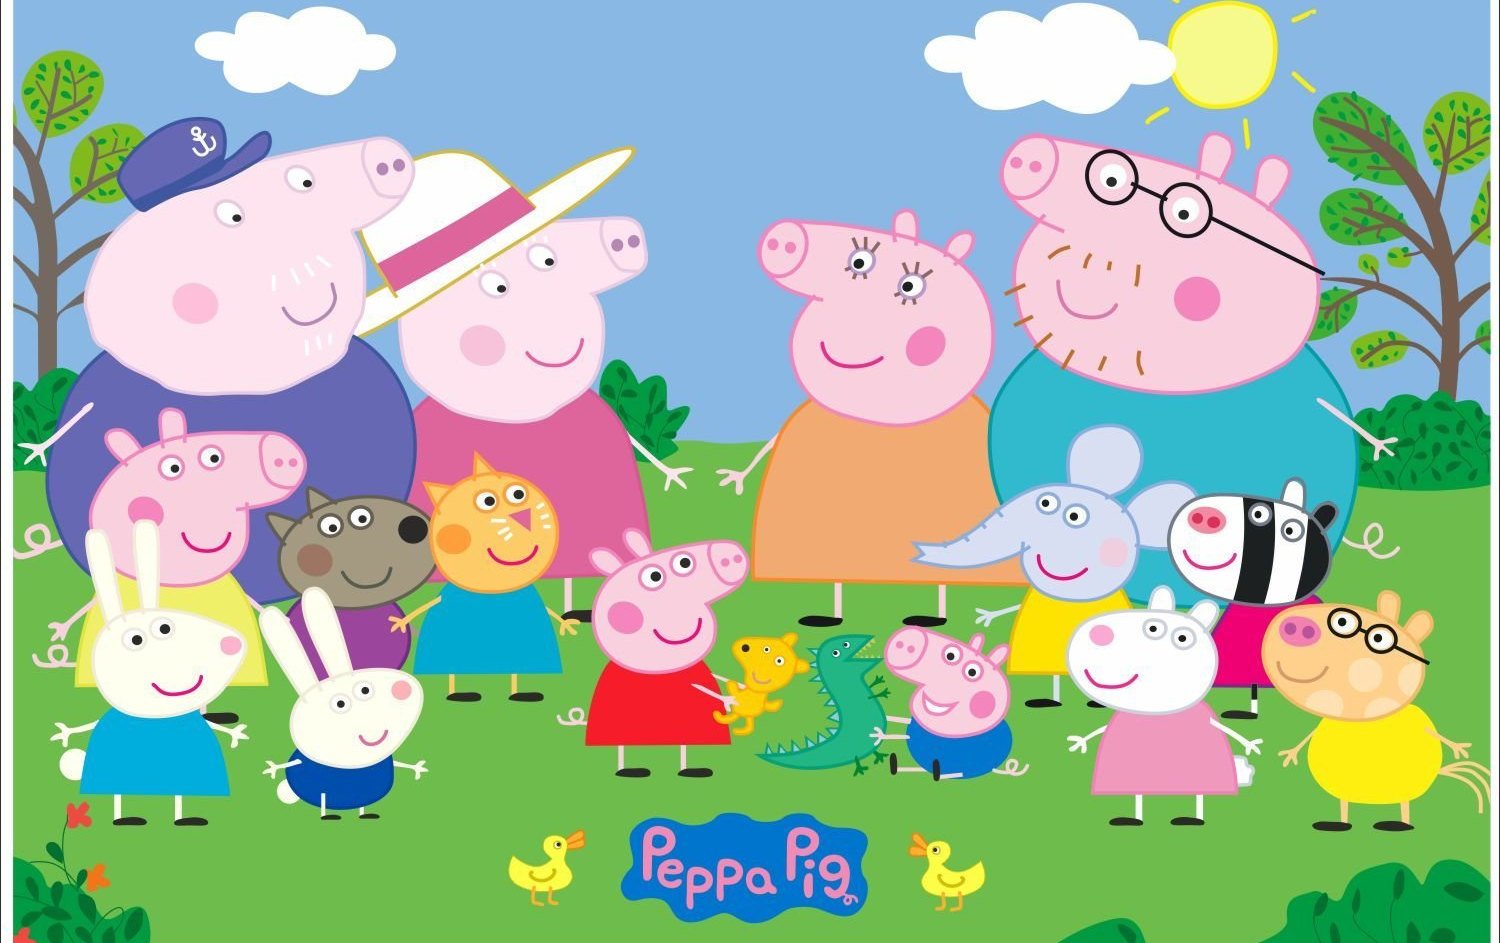 Who is inside Peppa Pig's house in the Peppa Pig house wallpaper? :  r/peppapiglore